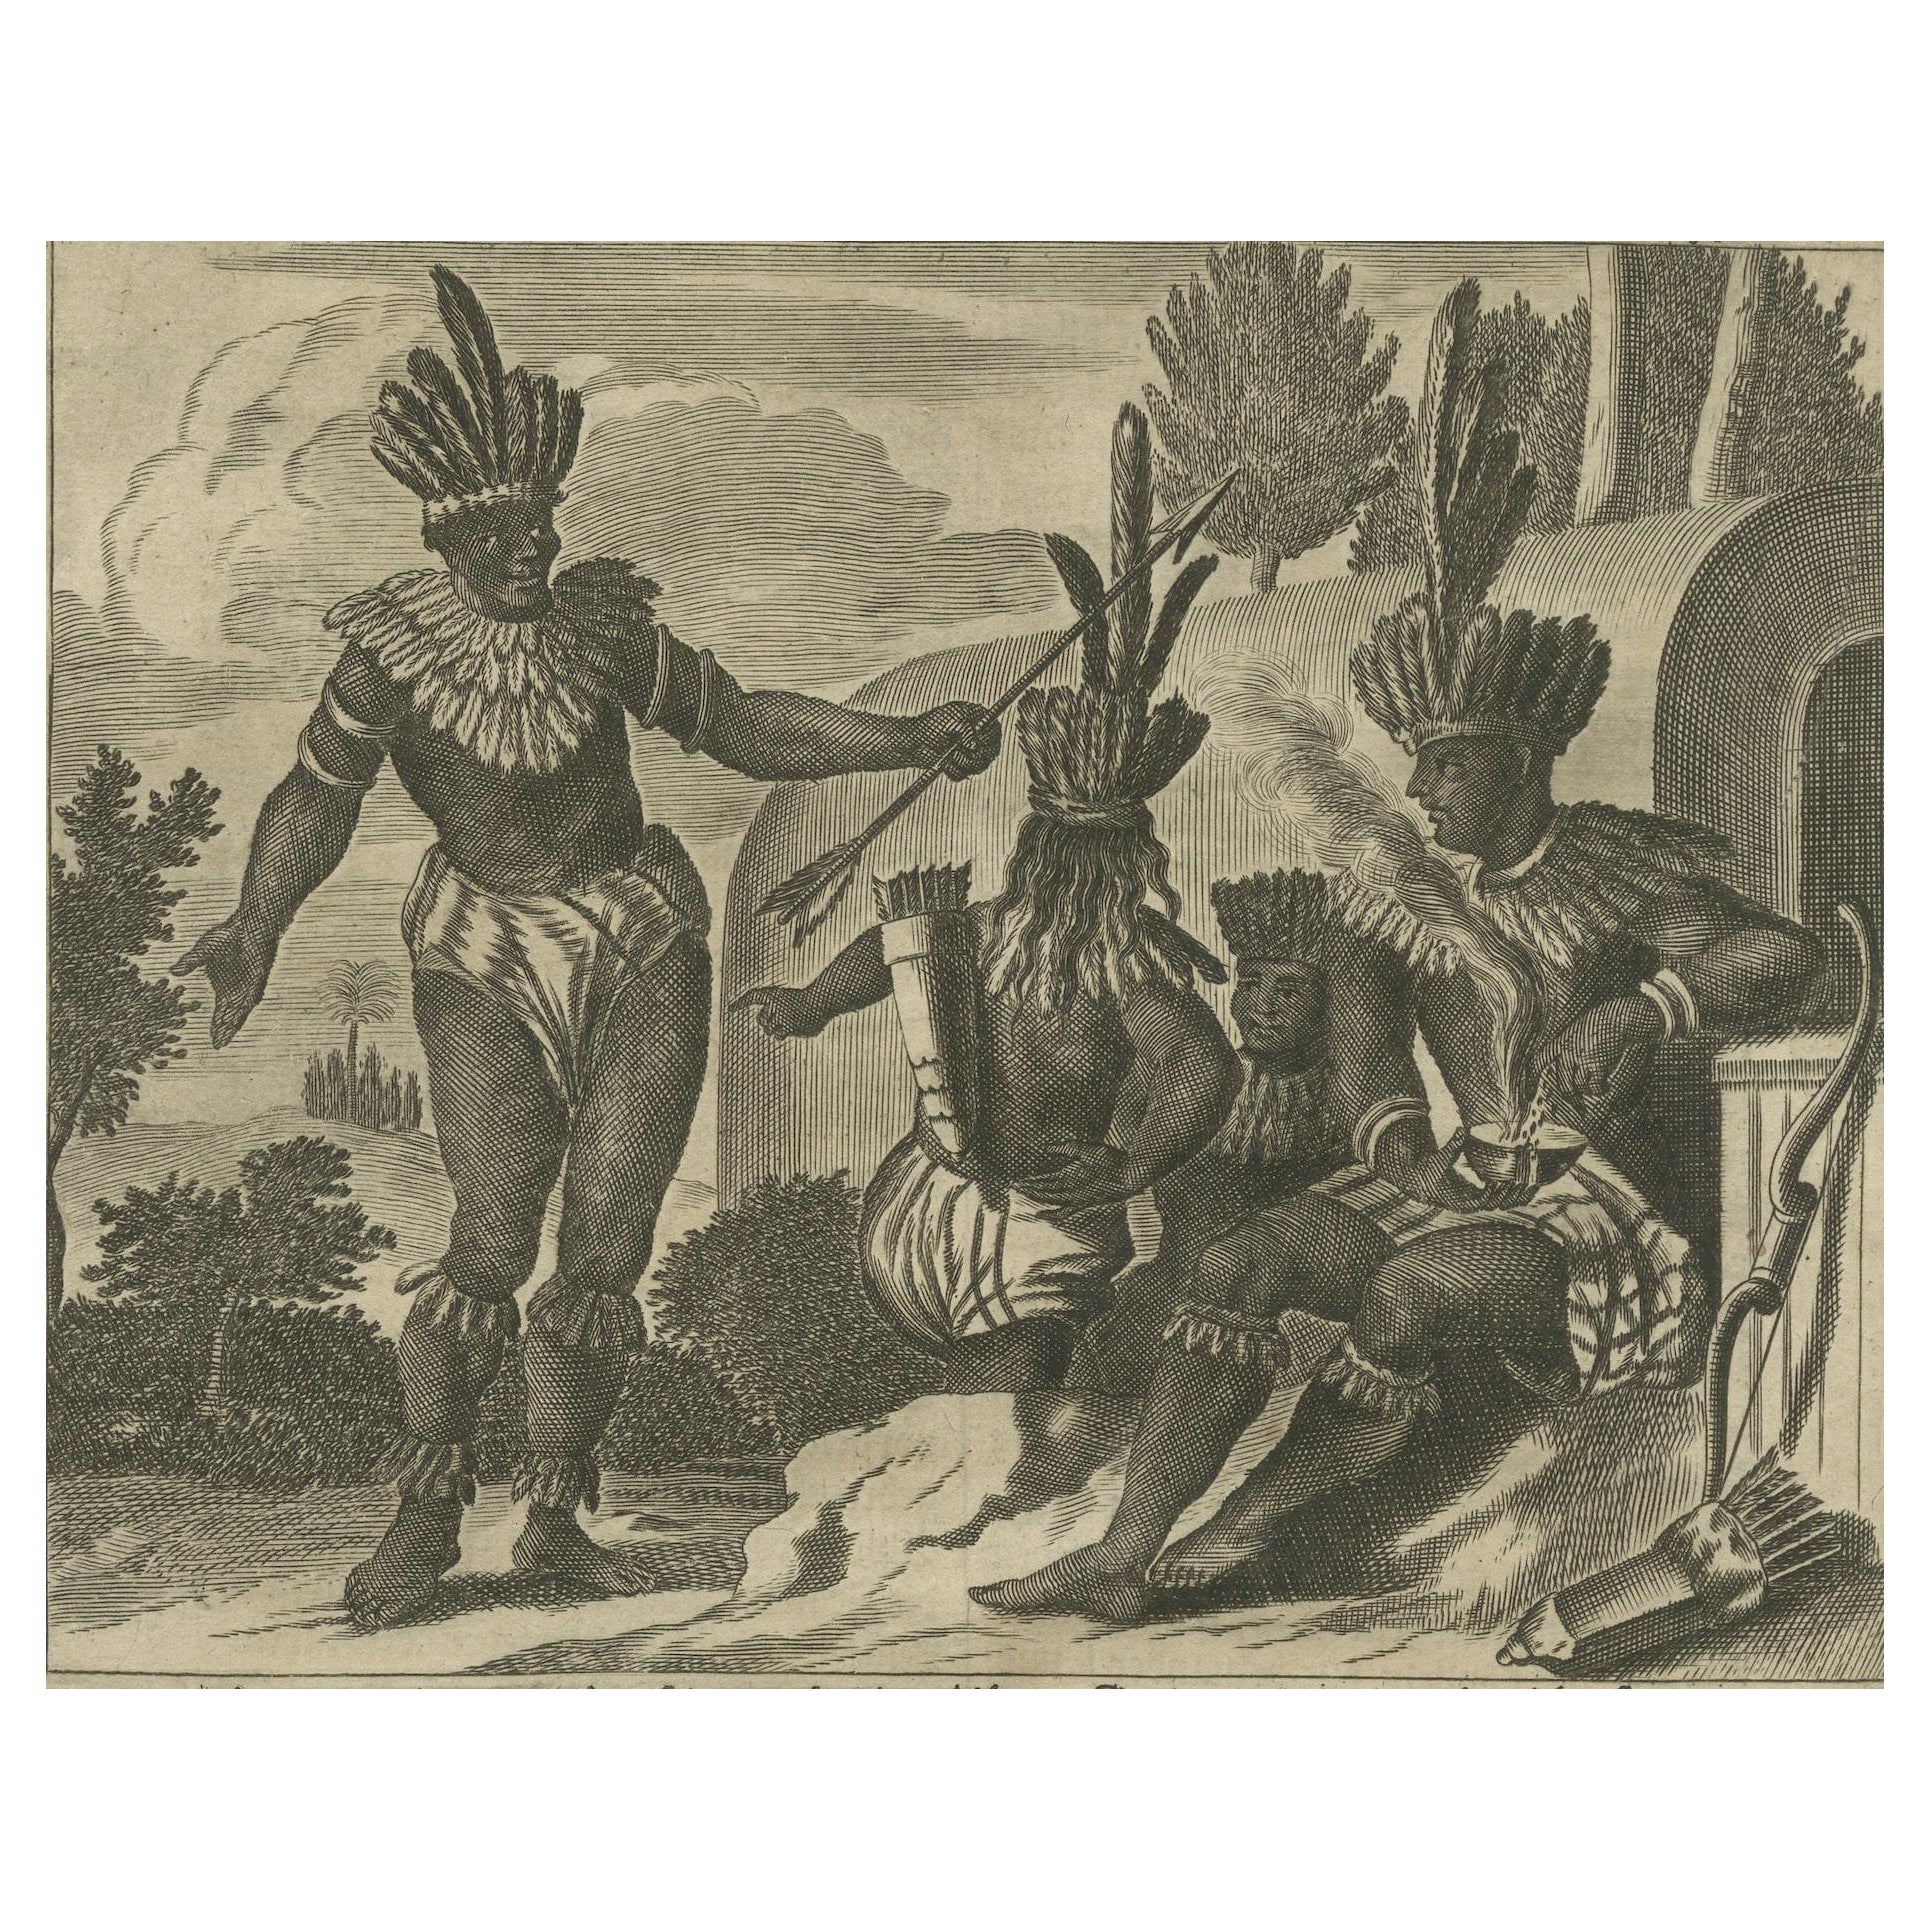 Engraving of a Ceremonial Gathering in New Spain in New Spain by Montanus, 1673